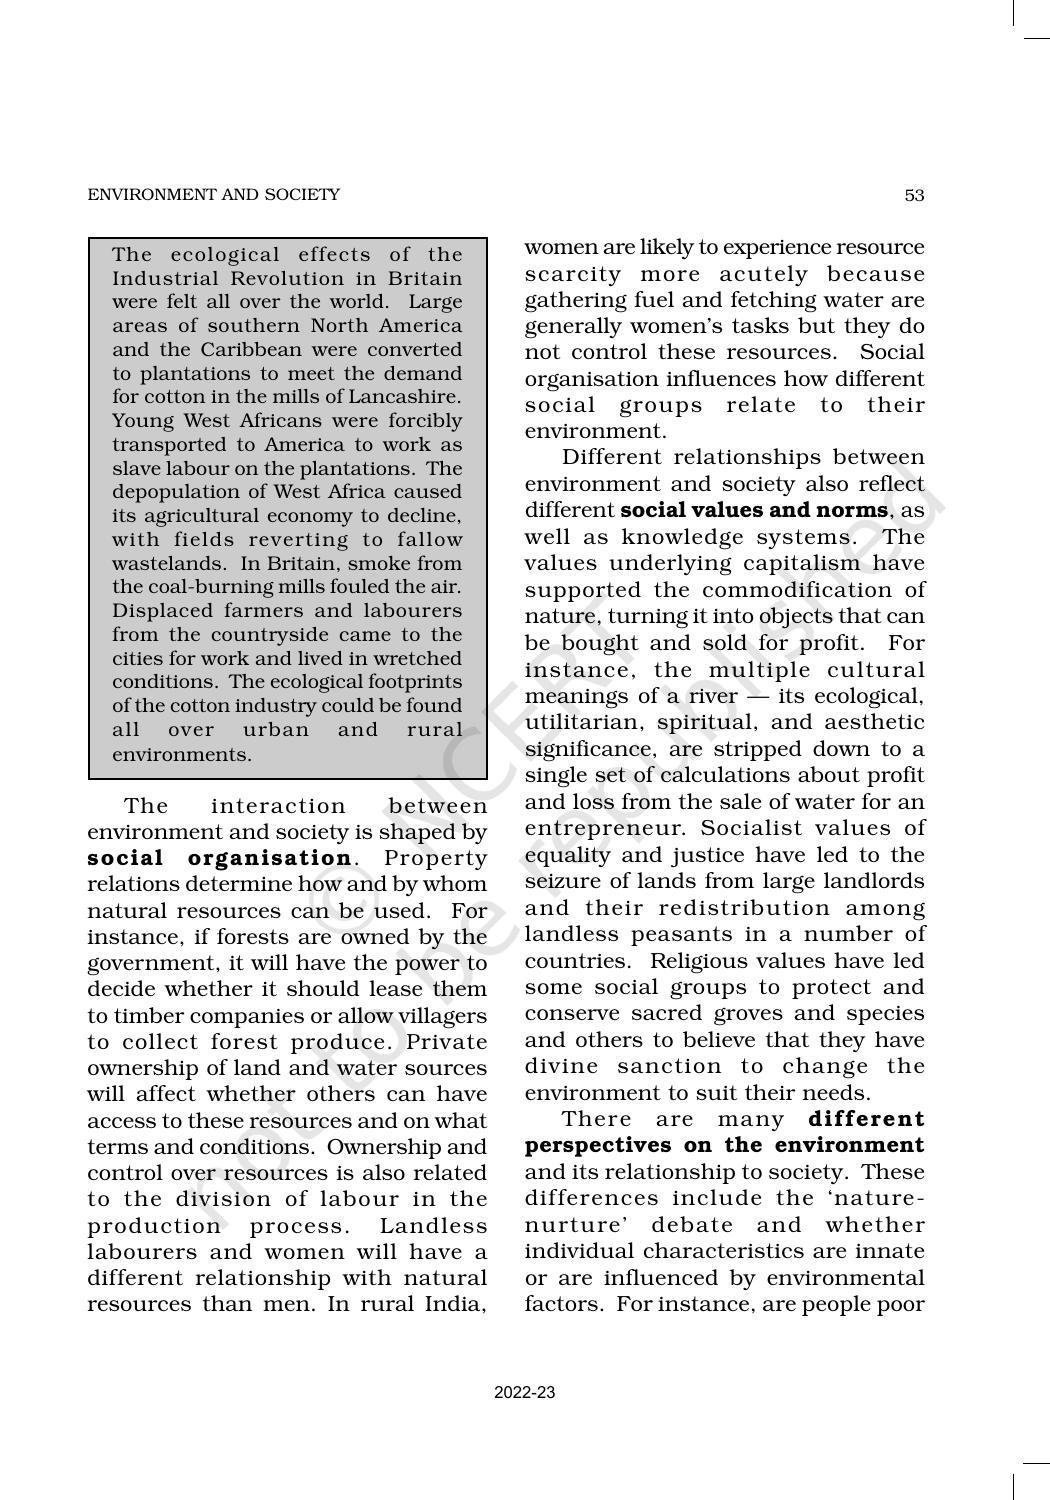 NCERT Book for Class 11 Sociology (Part-II) Chapter 3 Environment and Society - Page 4